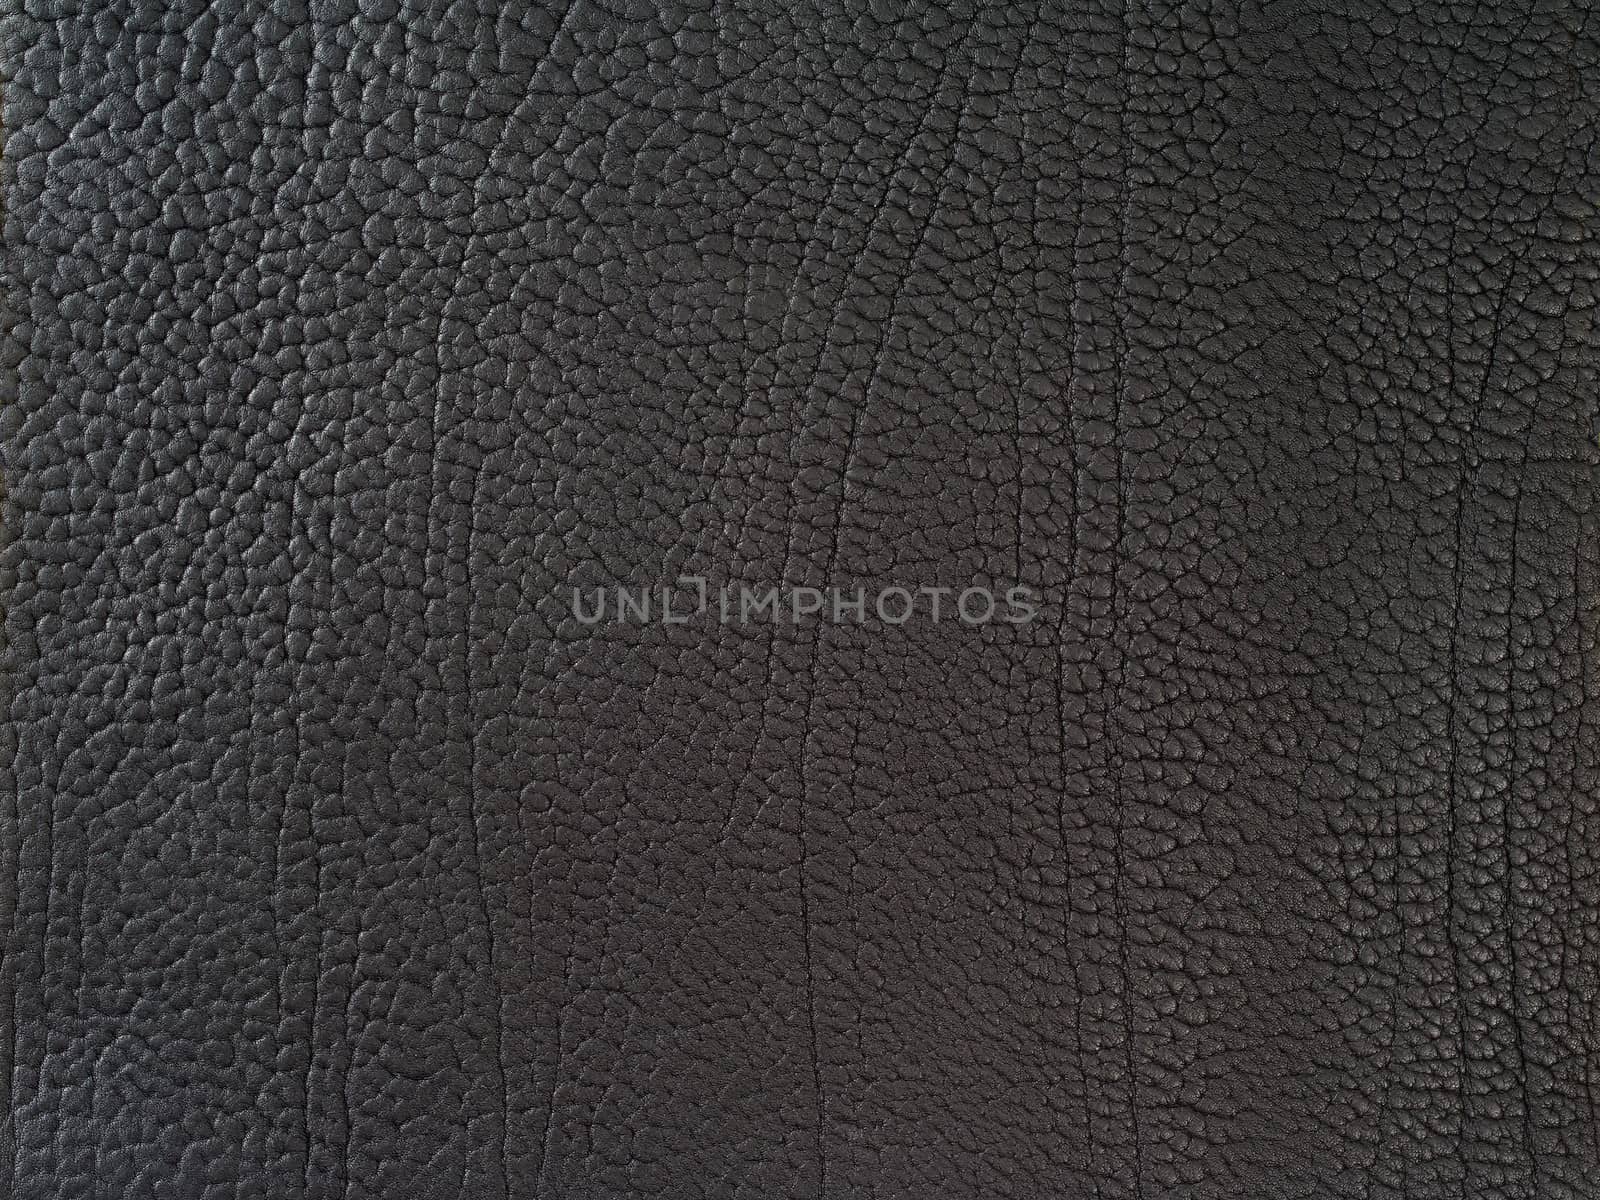 Black leather background by sumners